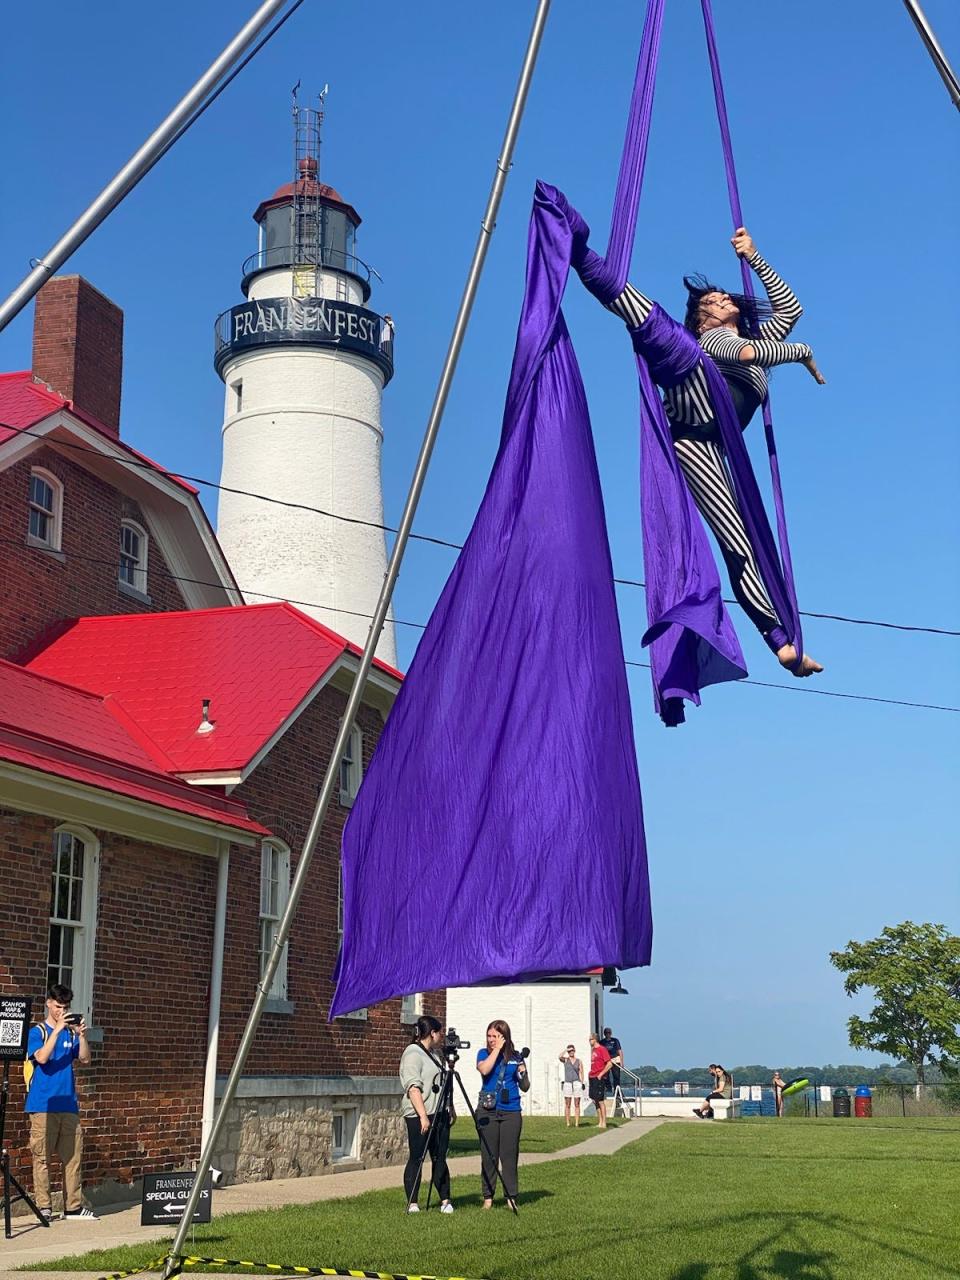 A dancer with D3 circus performs at Frankenfest in front of the Fort Gratiot Lighthouse